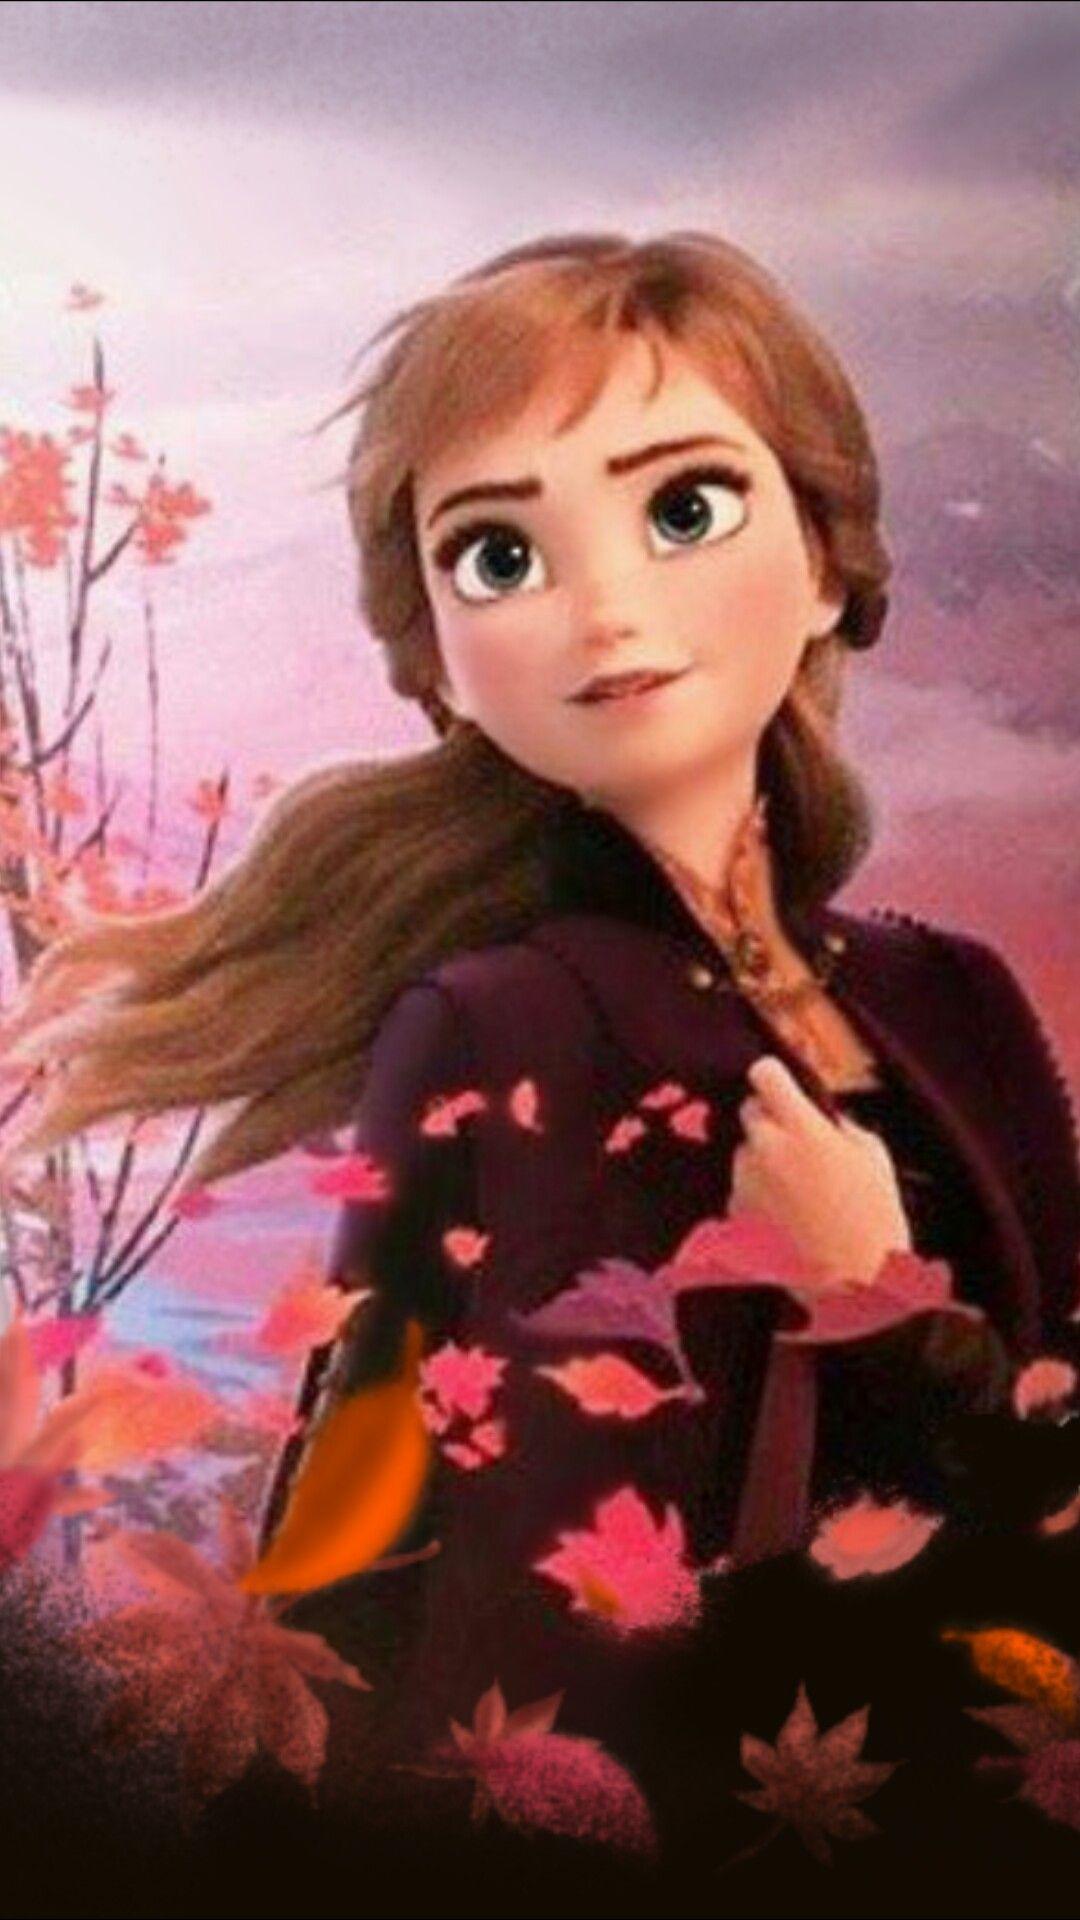 Princess Anna of upcoming movie Frozen 2? Anna's new hairstyle is